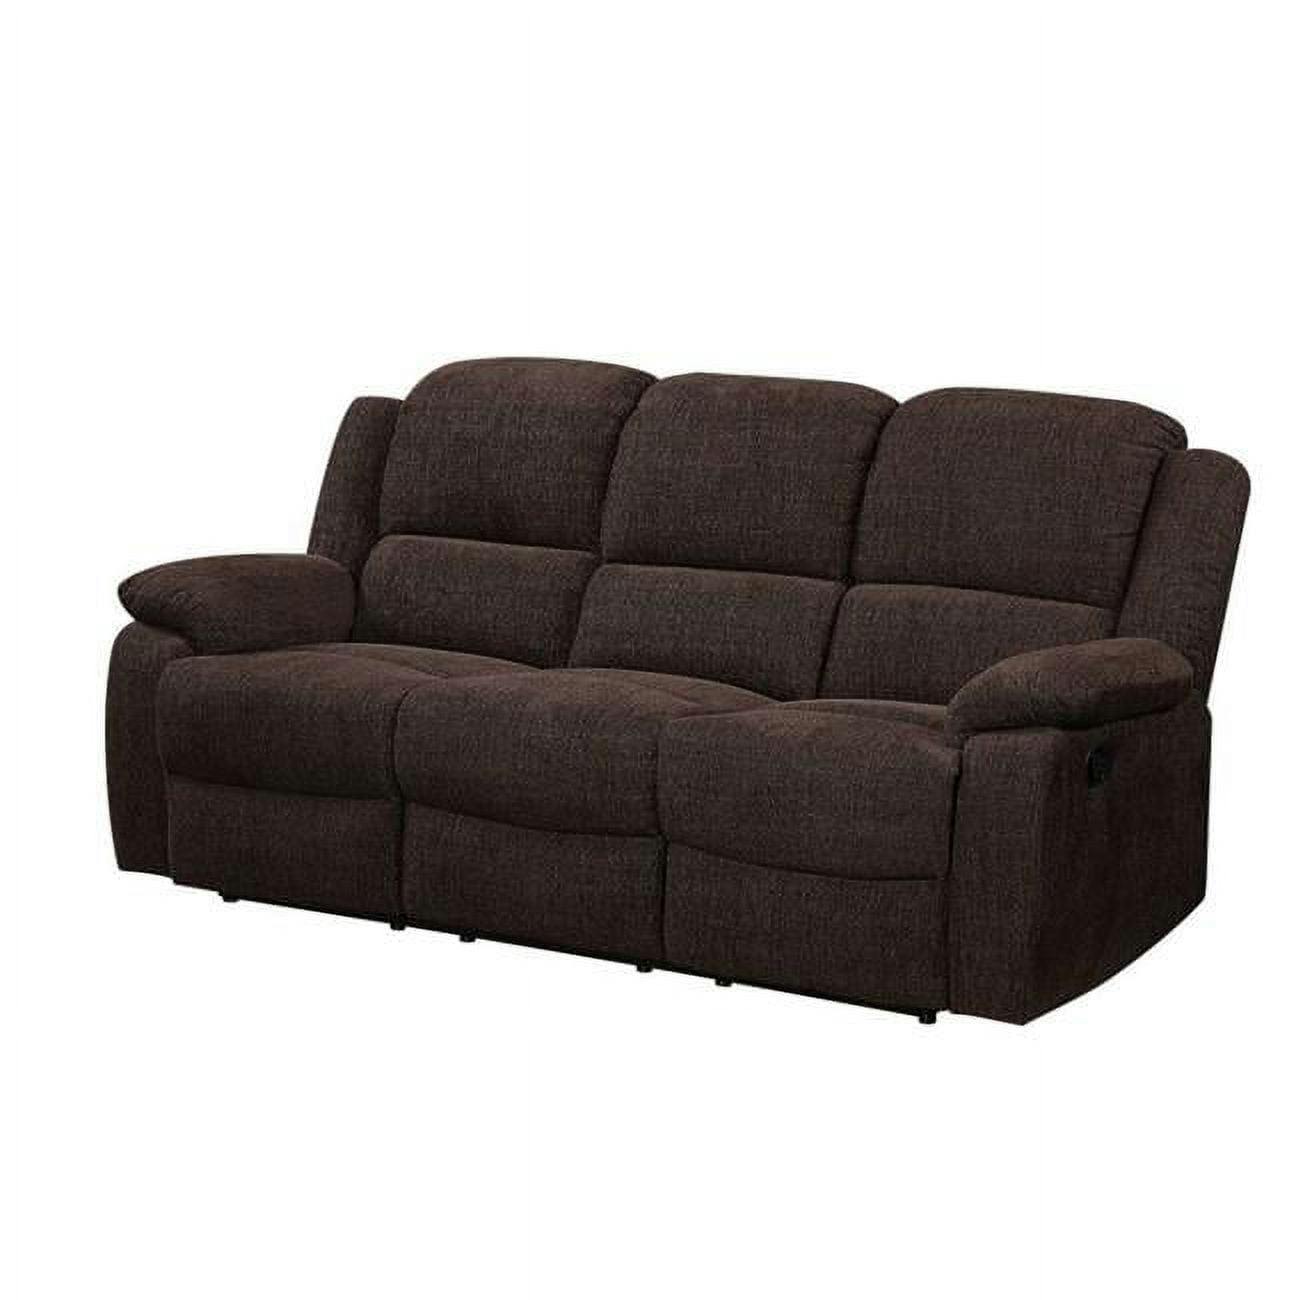 Kalen 78'' Velvety Brown Chenille Reclining Sofa with Cup Holders